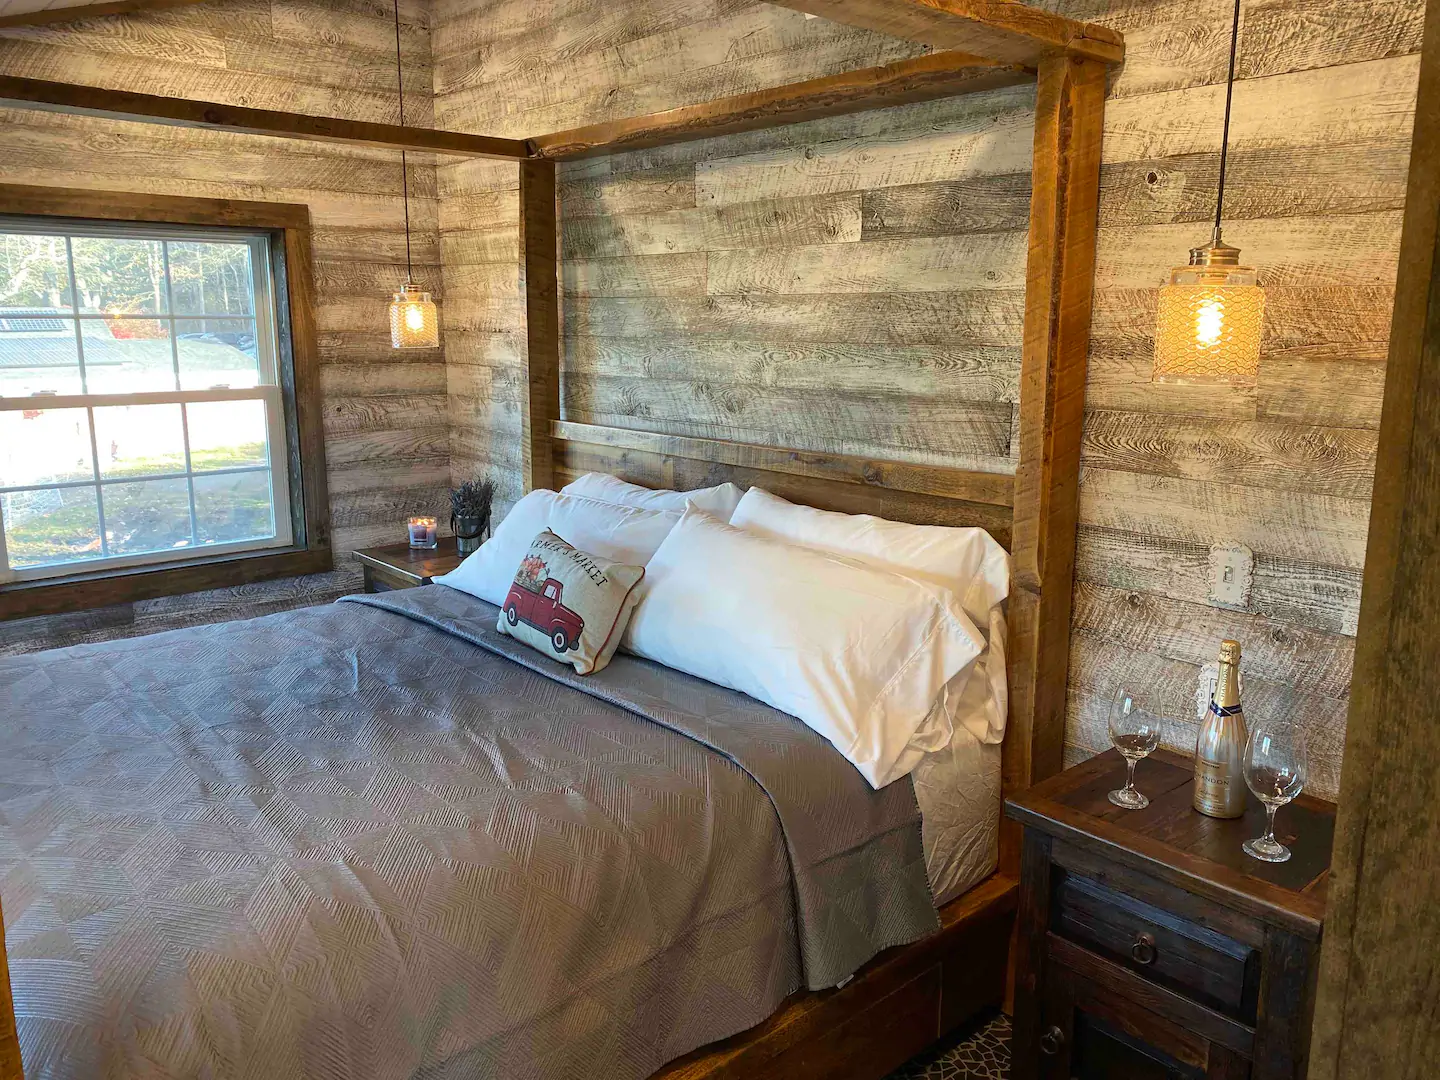 Wooden bed with grey bedding in a room with wooden walls. 